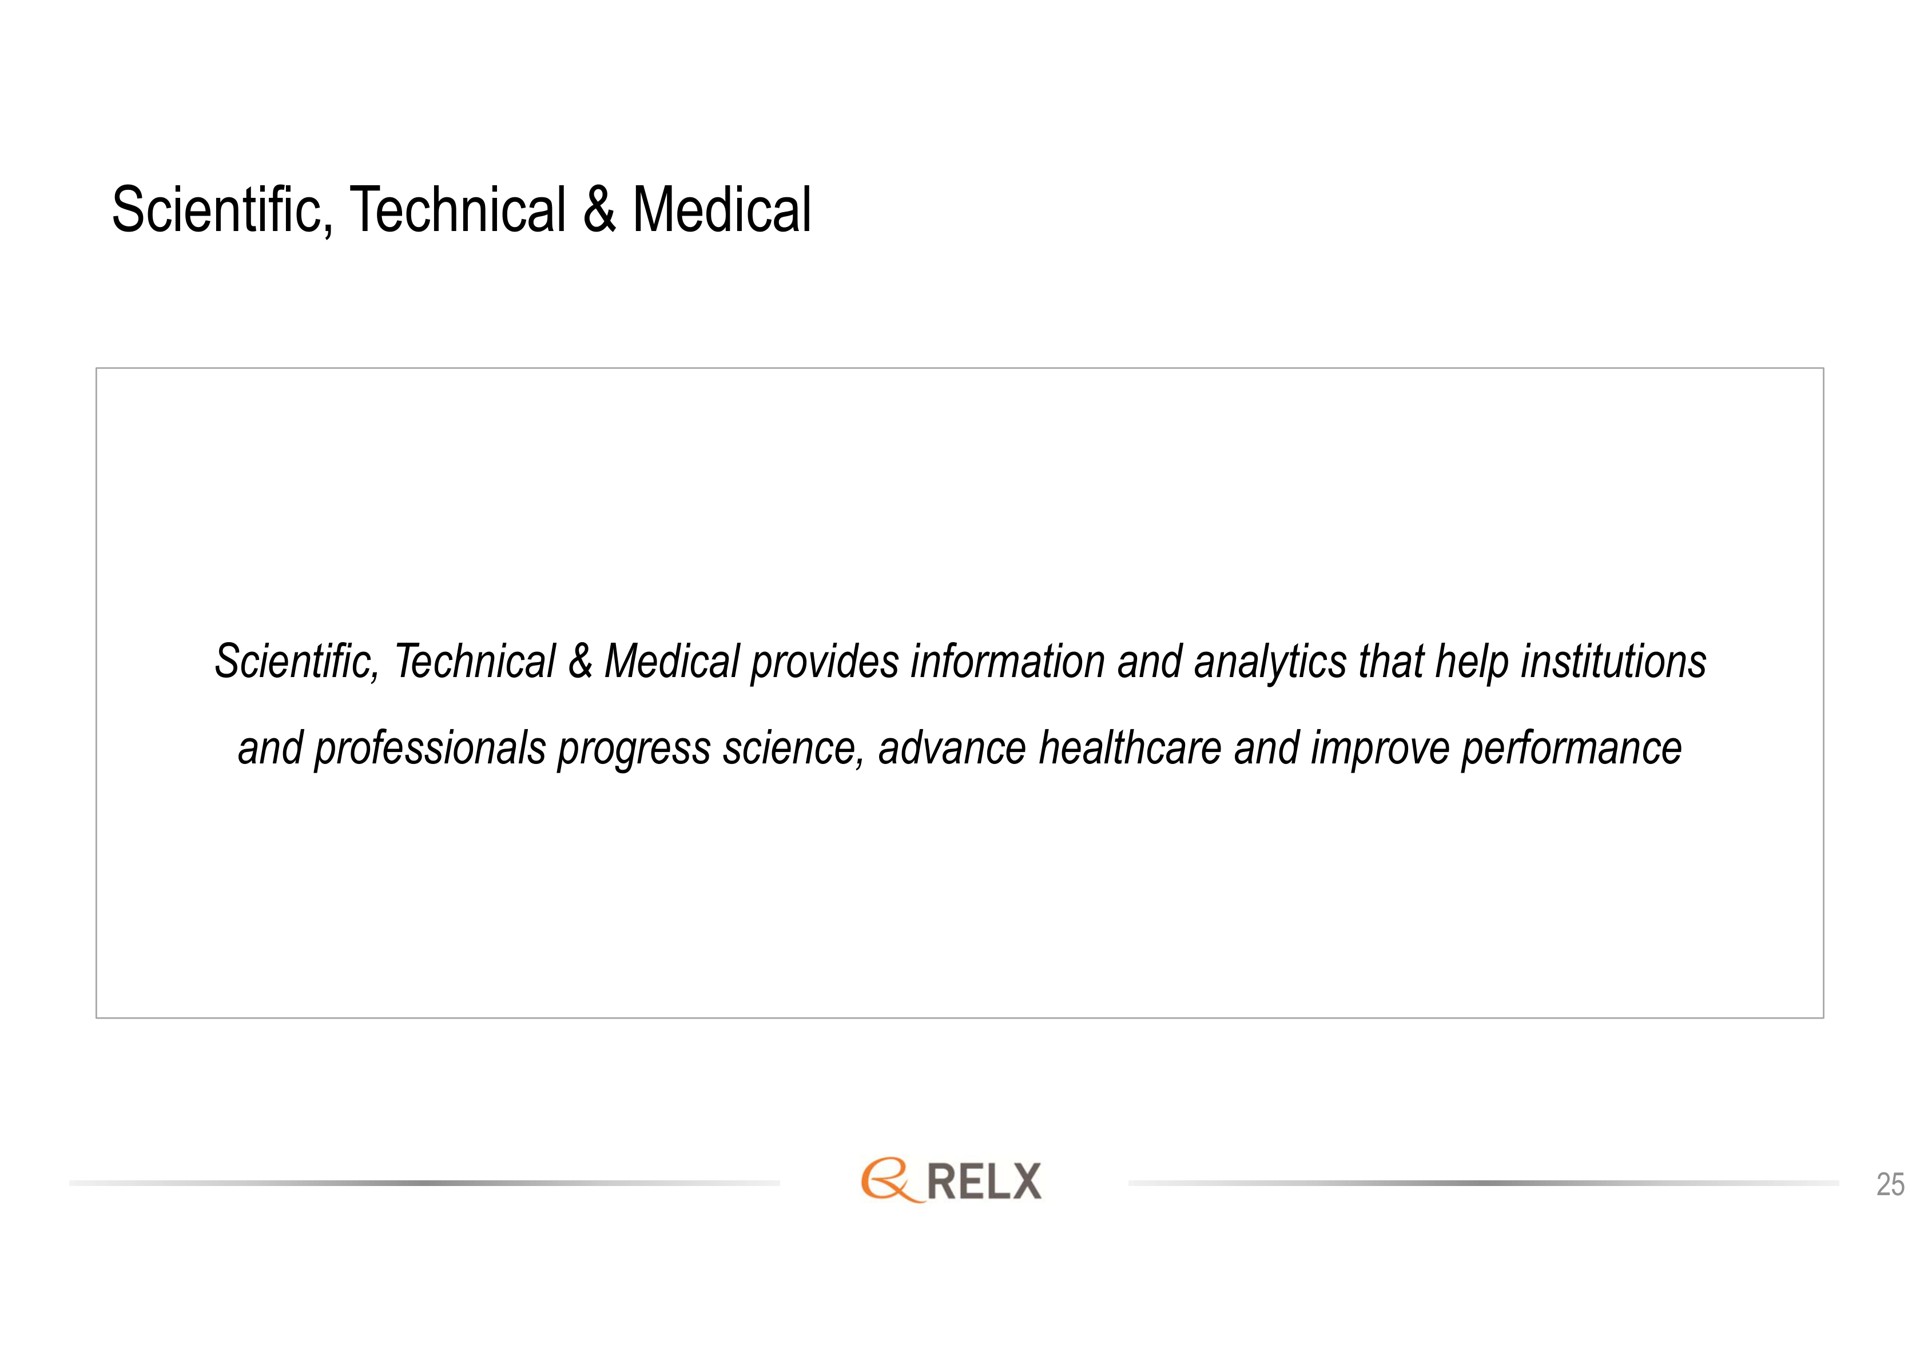 scientific technical medical scientific technical medical provides information and analytics that help institutions and professionals progress science advance and improve performance | RELX